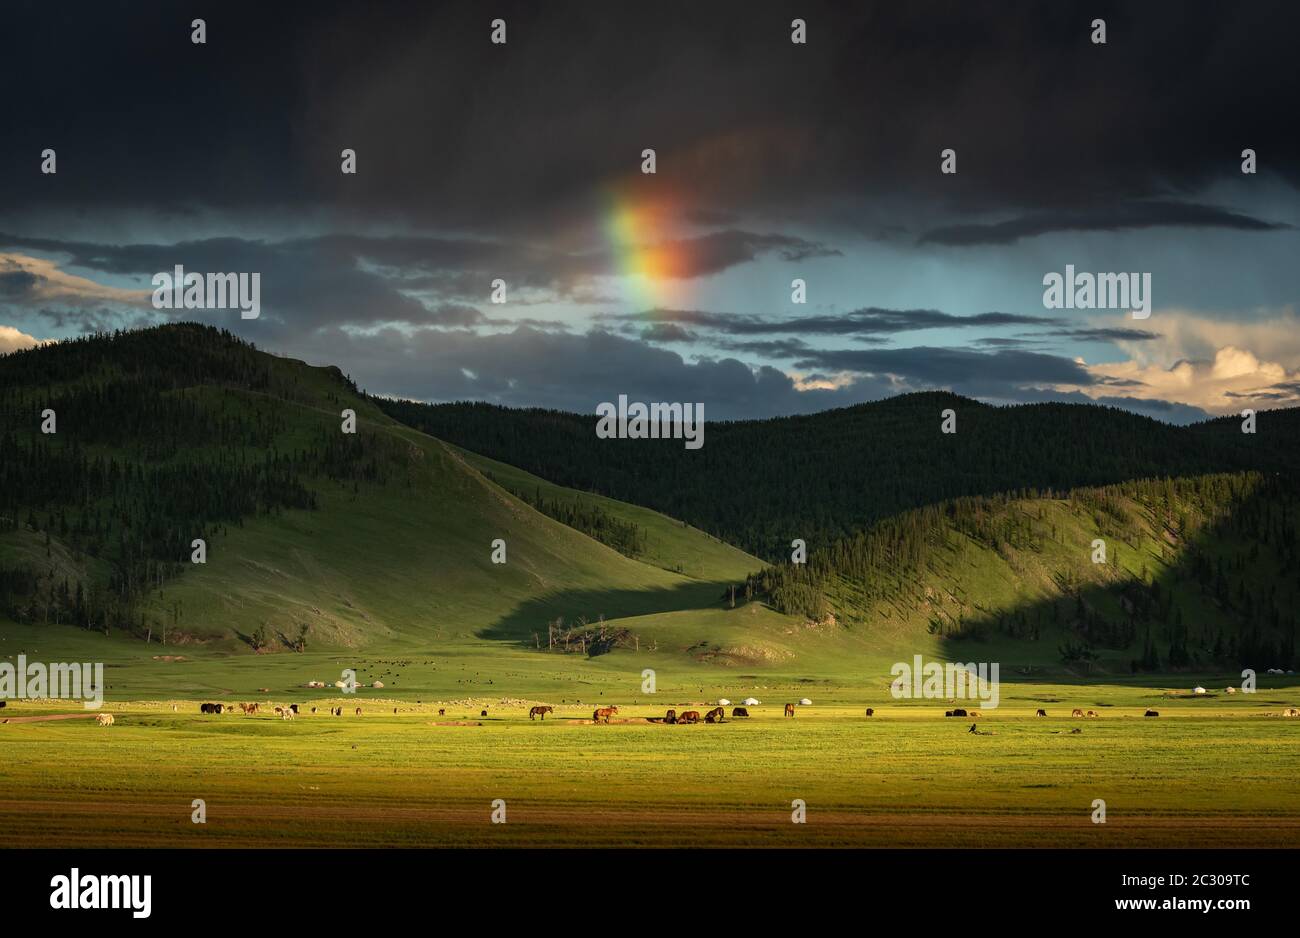 Orkhon valley nomadic life with grazing animals and gers in the back, the mountains, and a rainbow, Uvurkhangai province, Mongolia Stock Photo